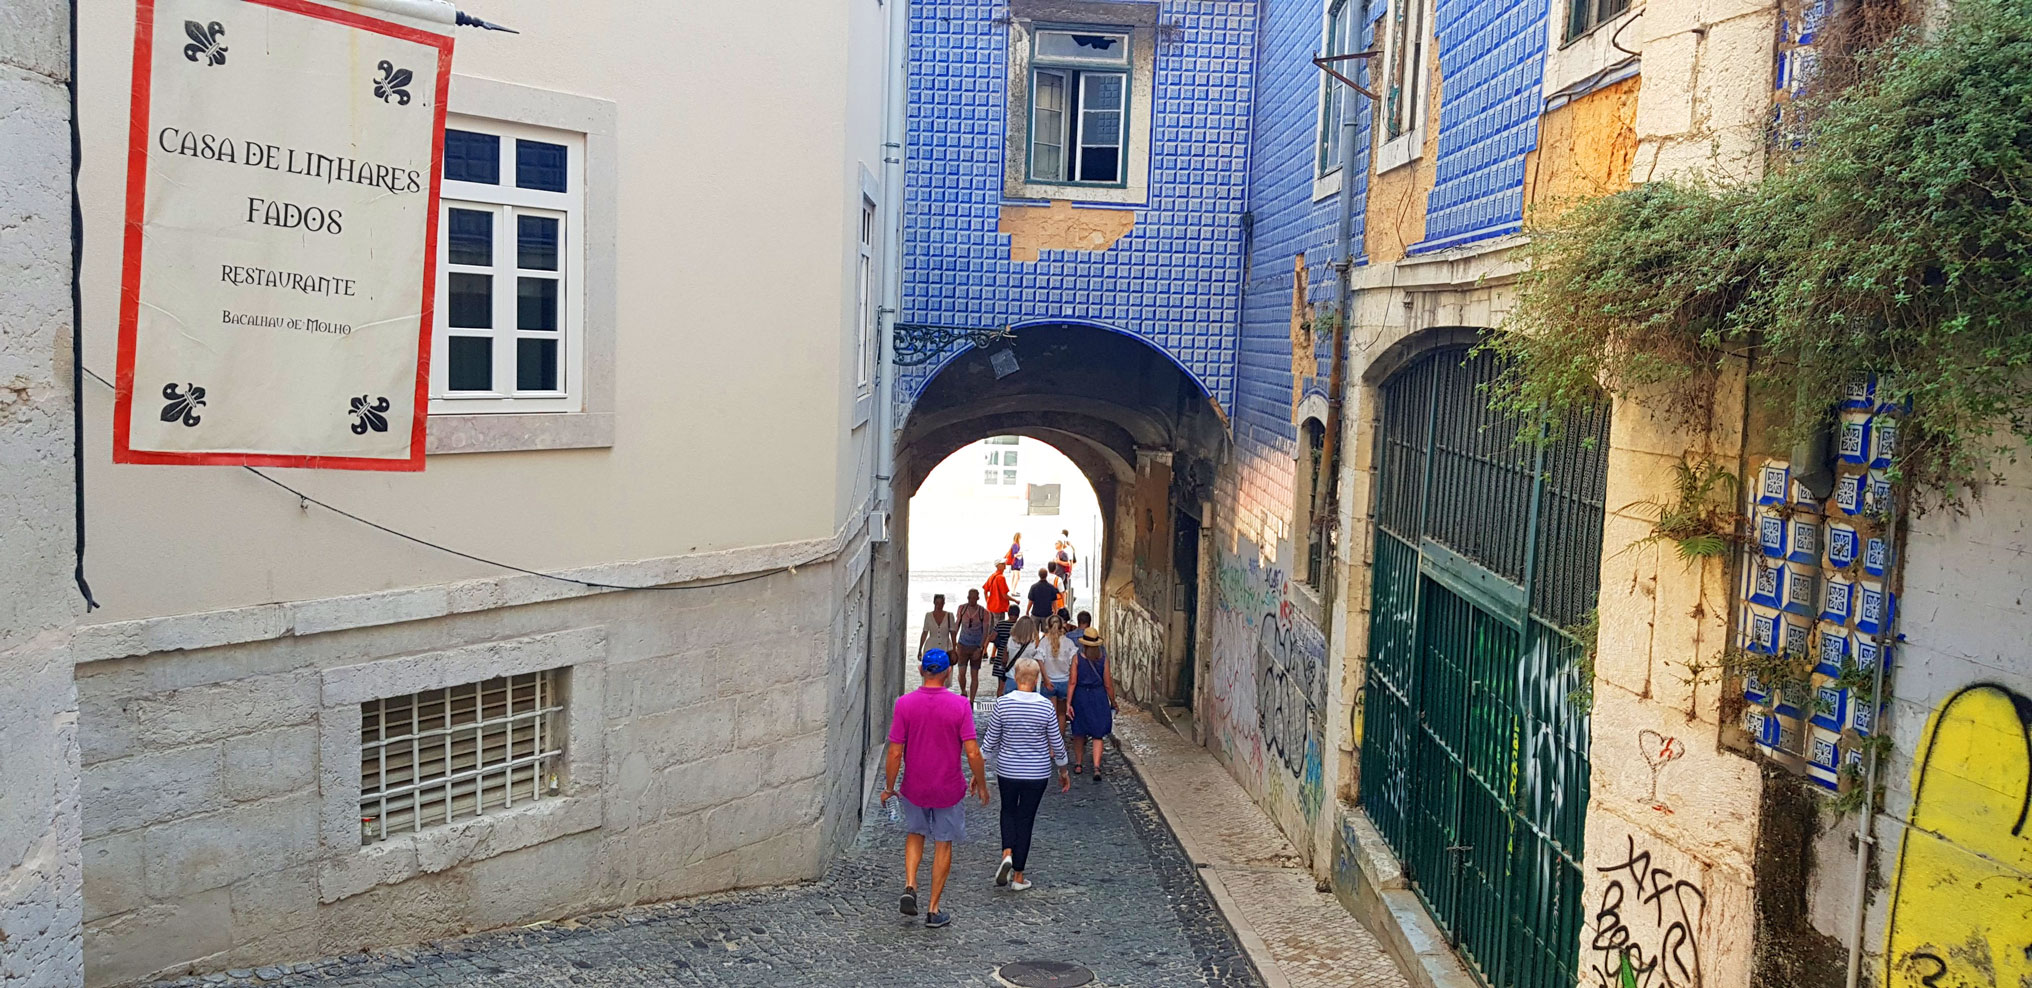 Looking for the best places for Fado music in Lisbon Portugal - The Alfama district